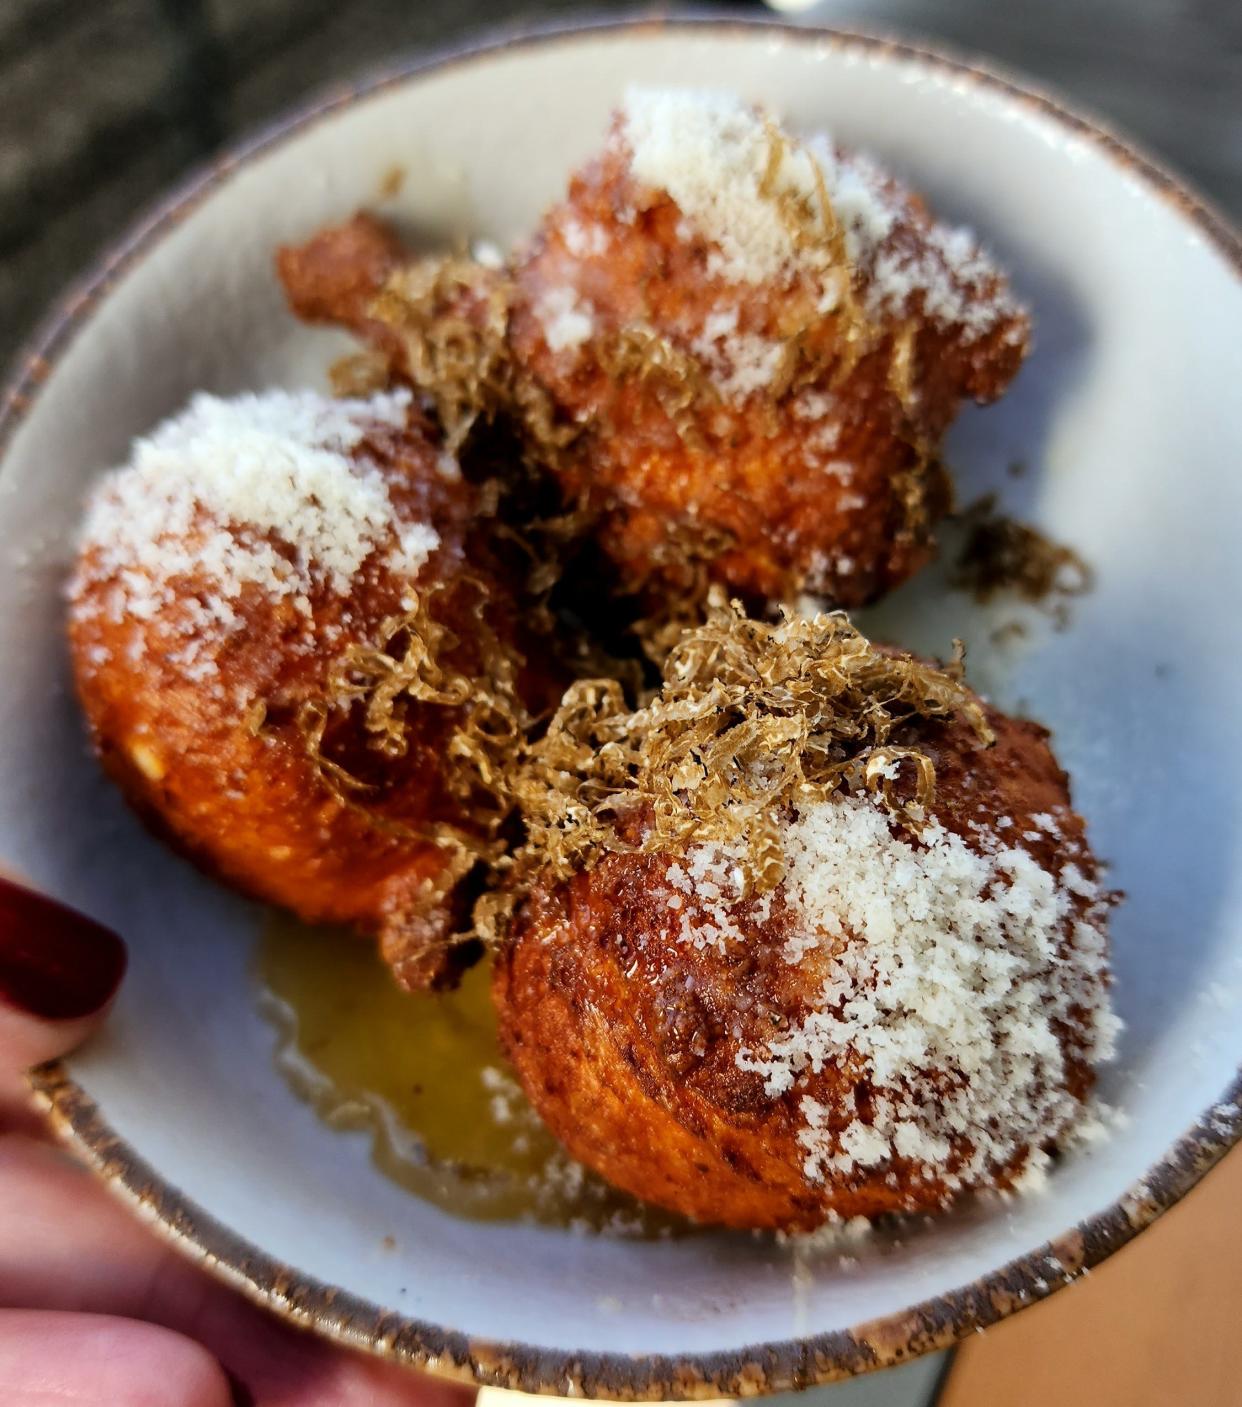 Ricotta Frittelle at Giusto in Newport, fried cheese balls served with drizzles of honey, truffles and Parmesan cheese.